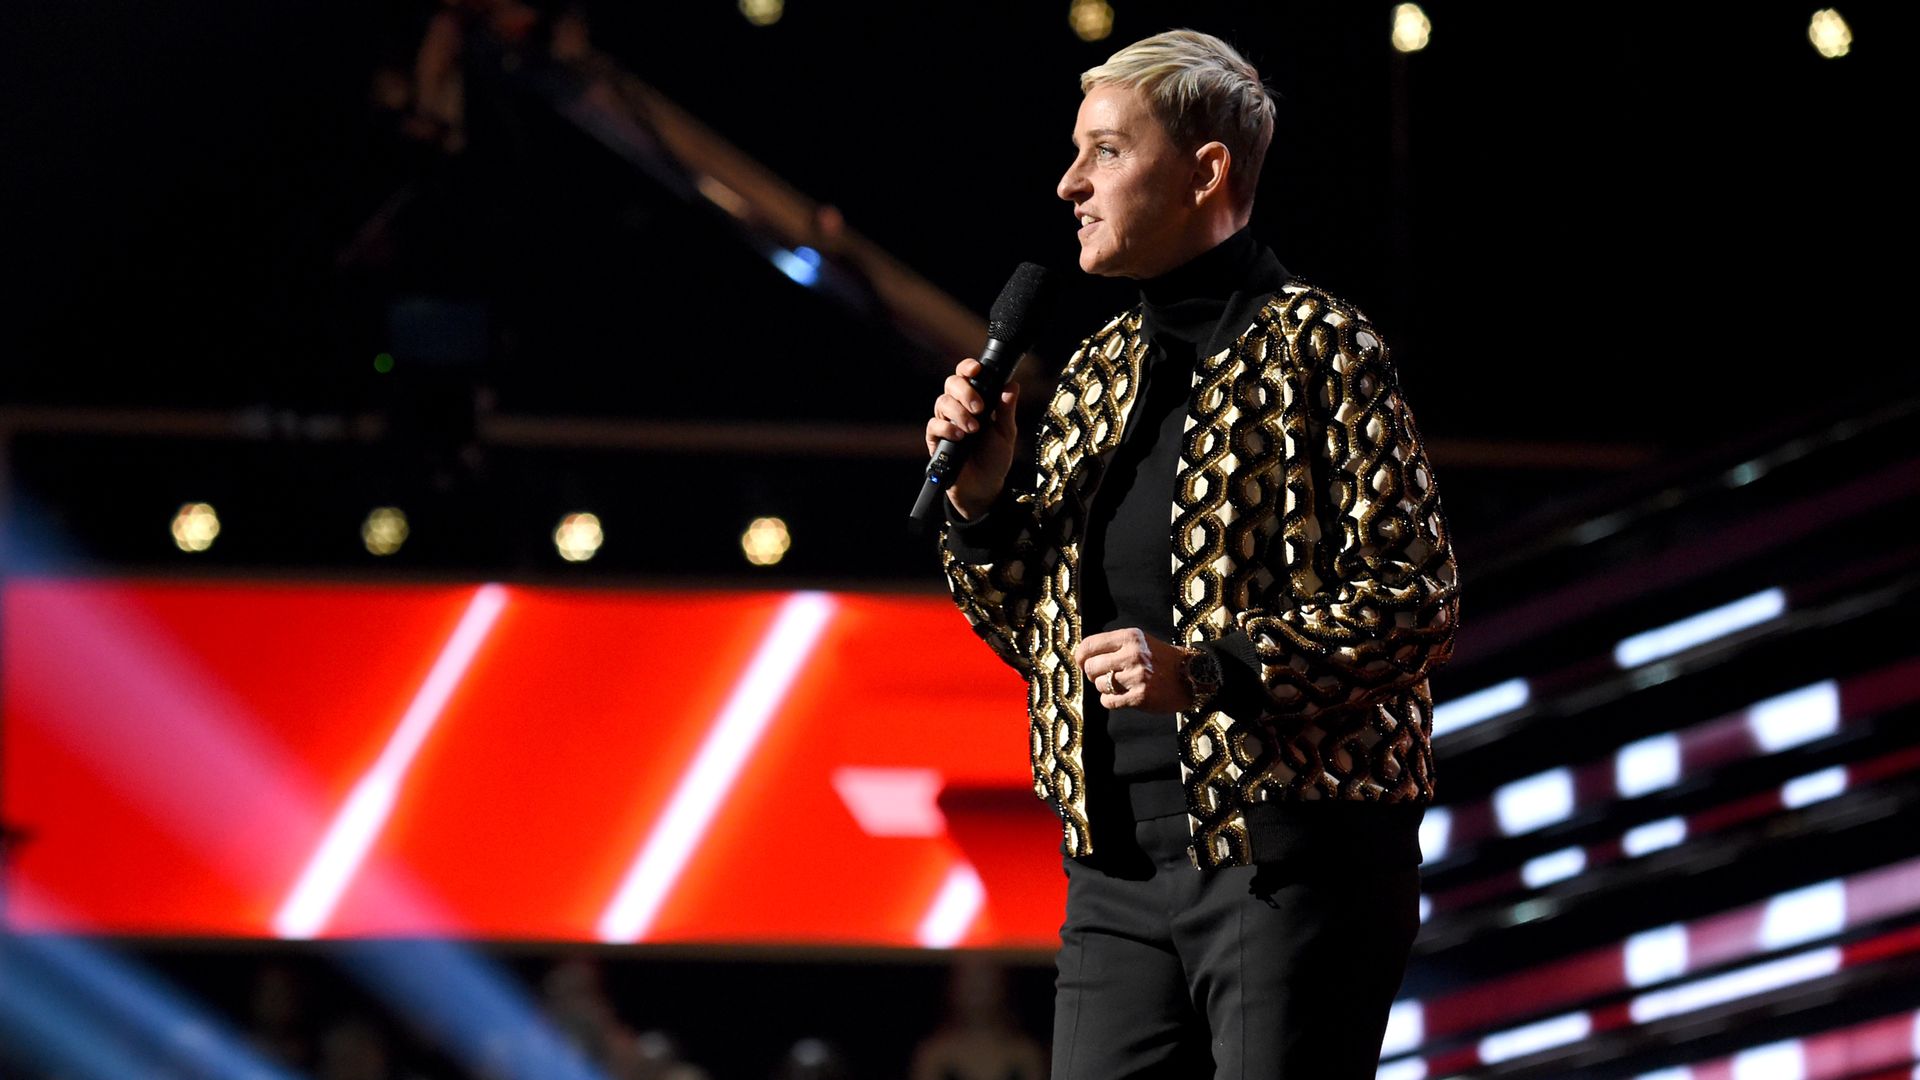  Ellen DeGeneres stands on stage and holds a microphone